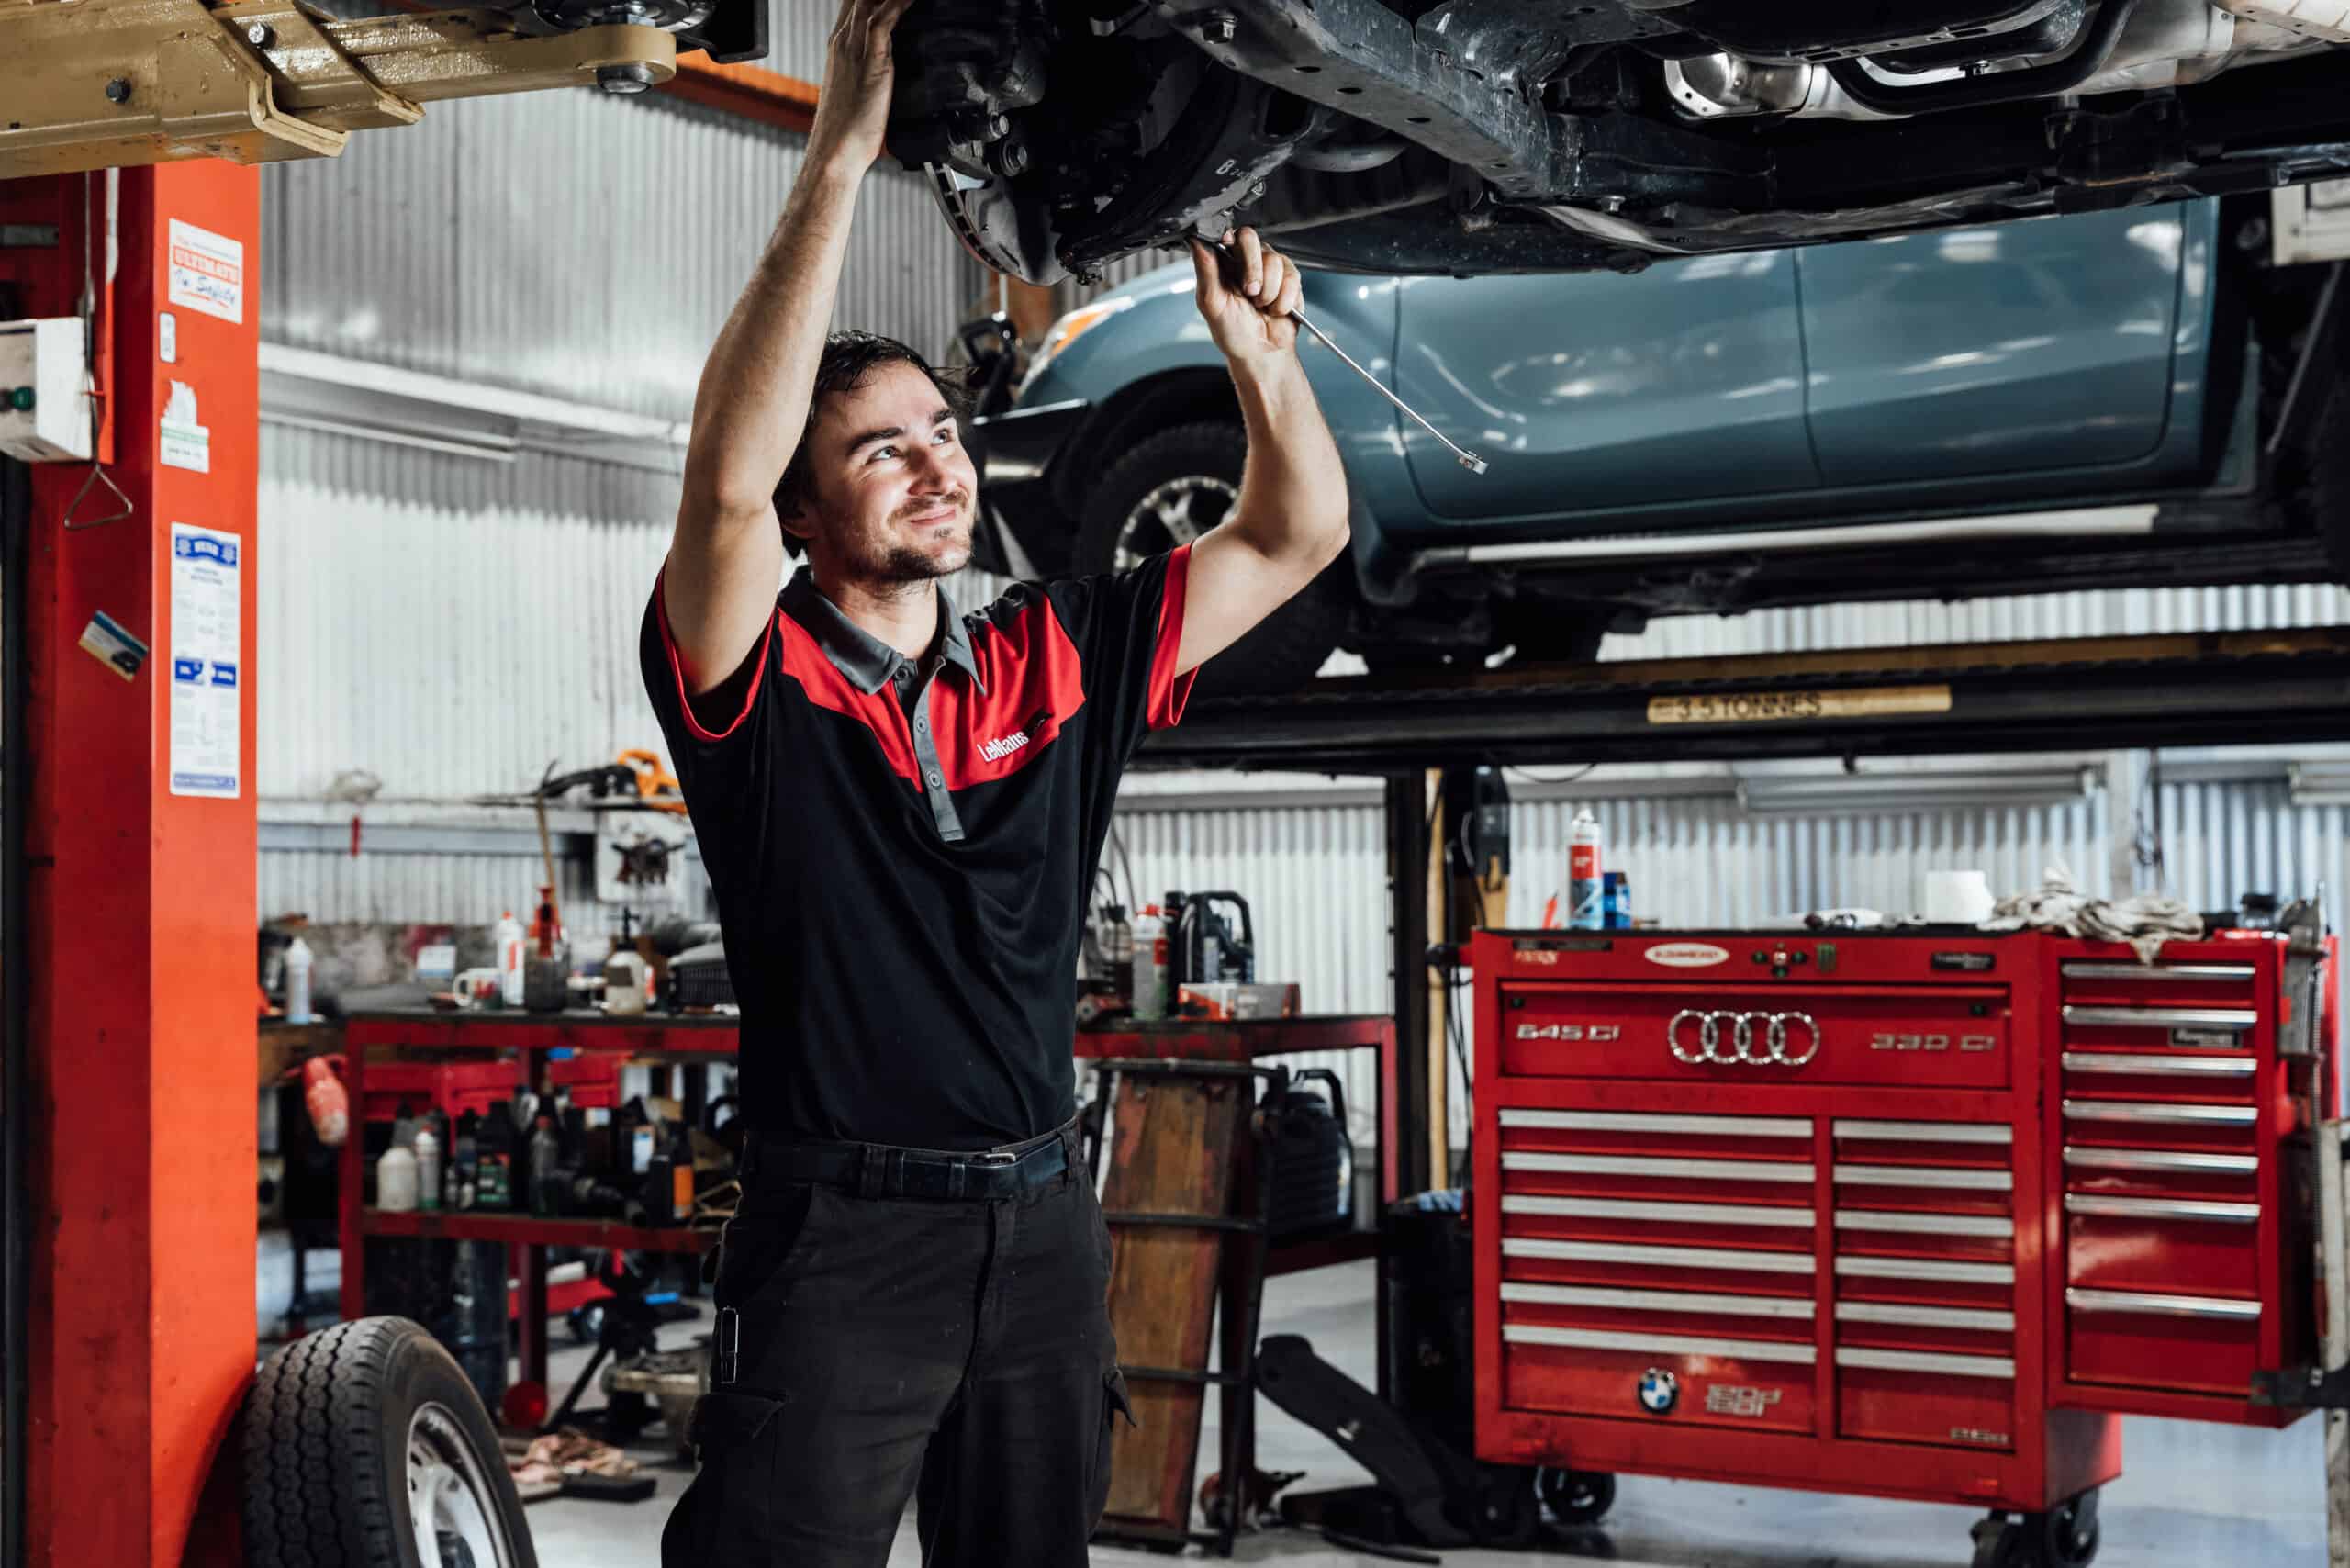 A car mechanic working on the underside of a raised car with red tool boxes in the background